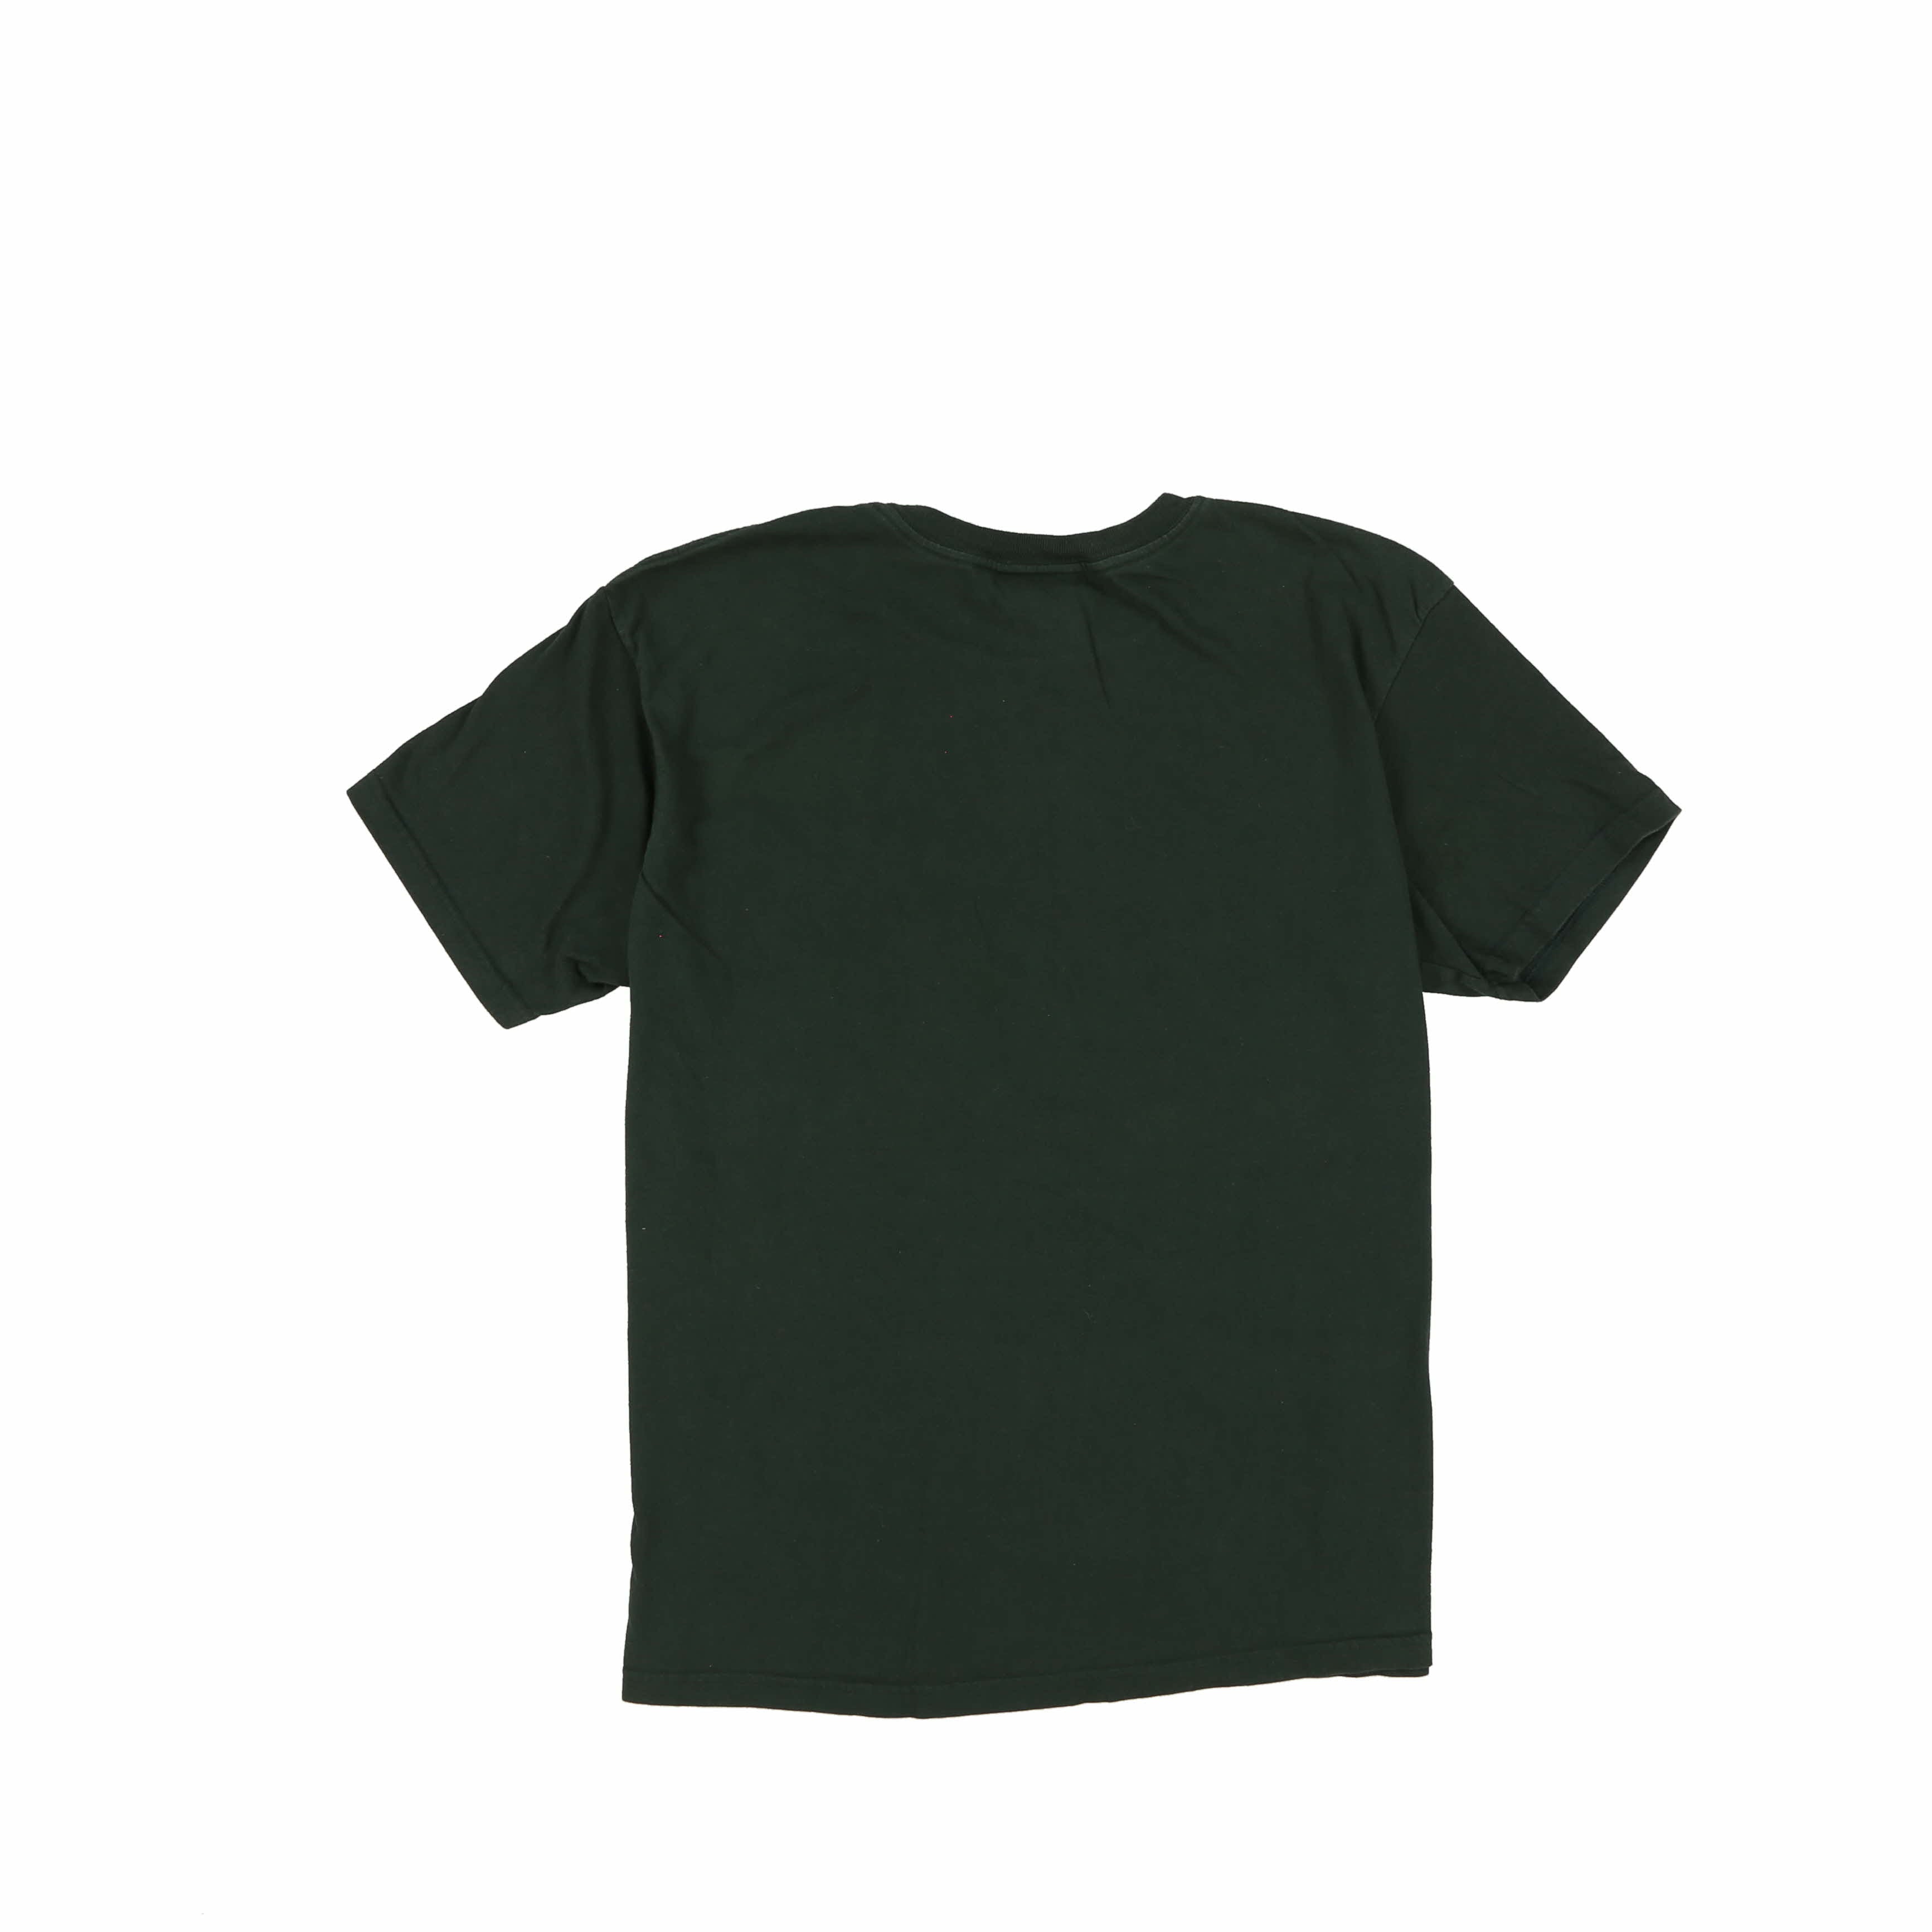 POLO SPORT PG-SCRIPT TEE // FOREST GREEN